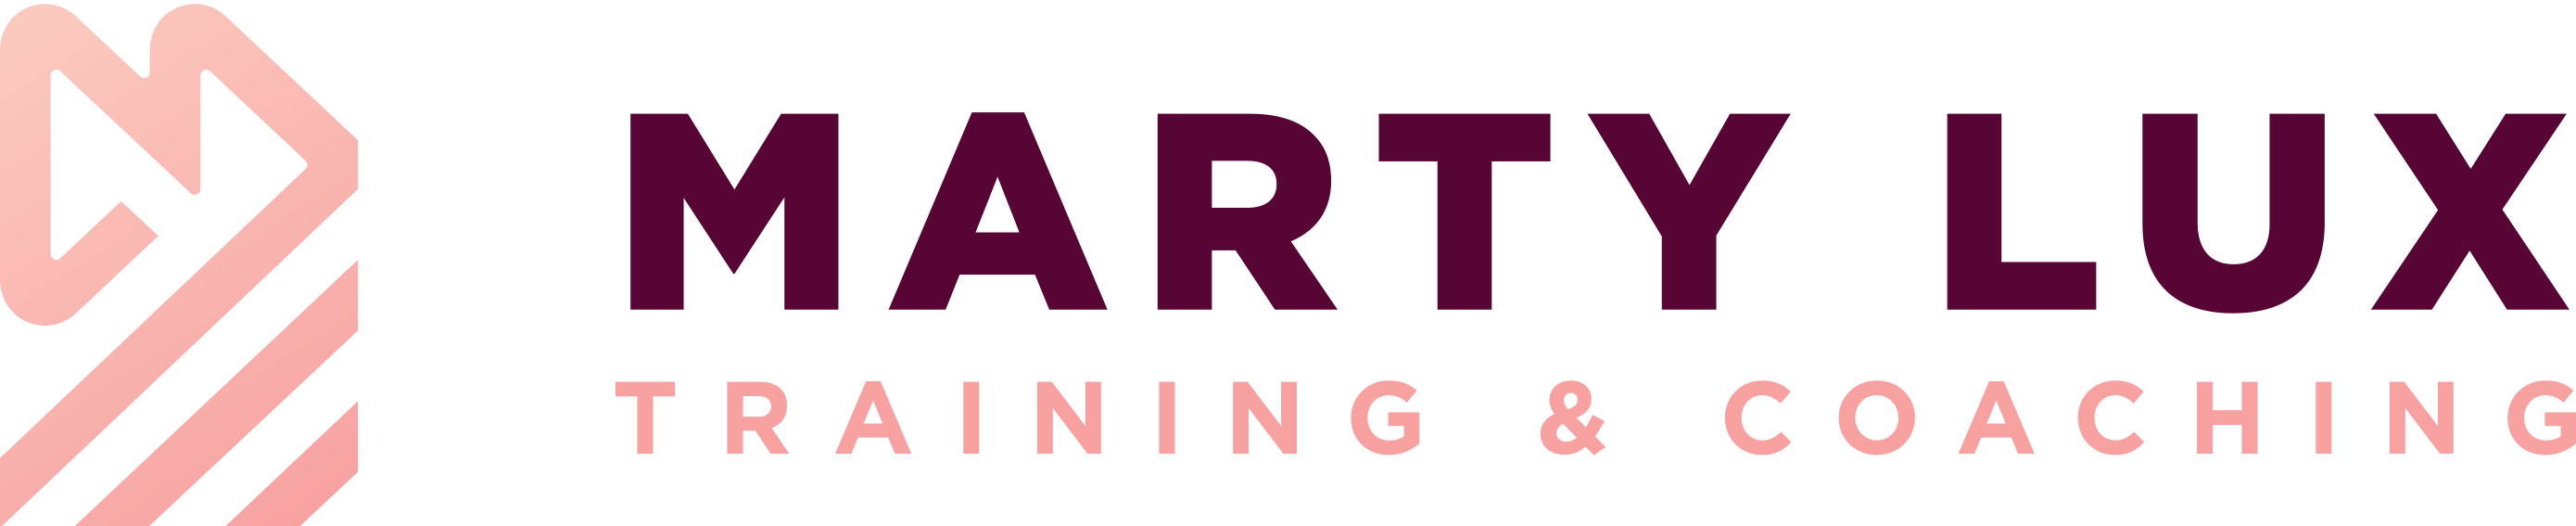 Marty Lux Training & Coaching